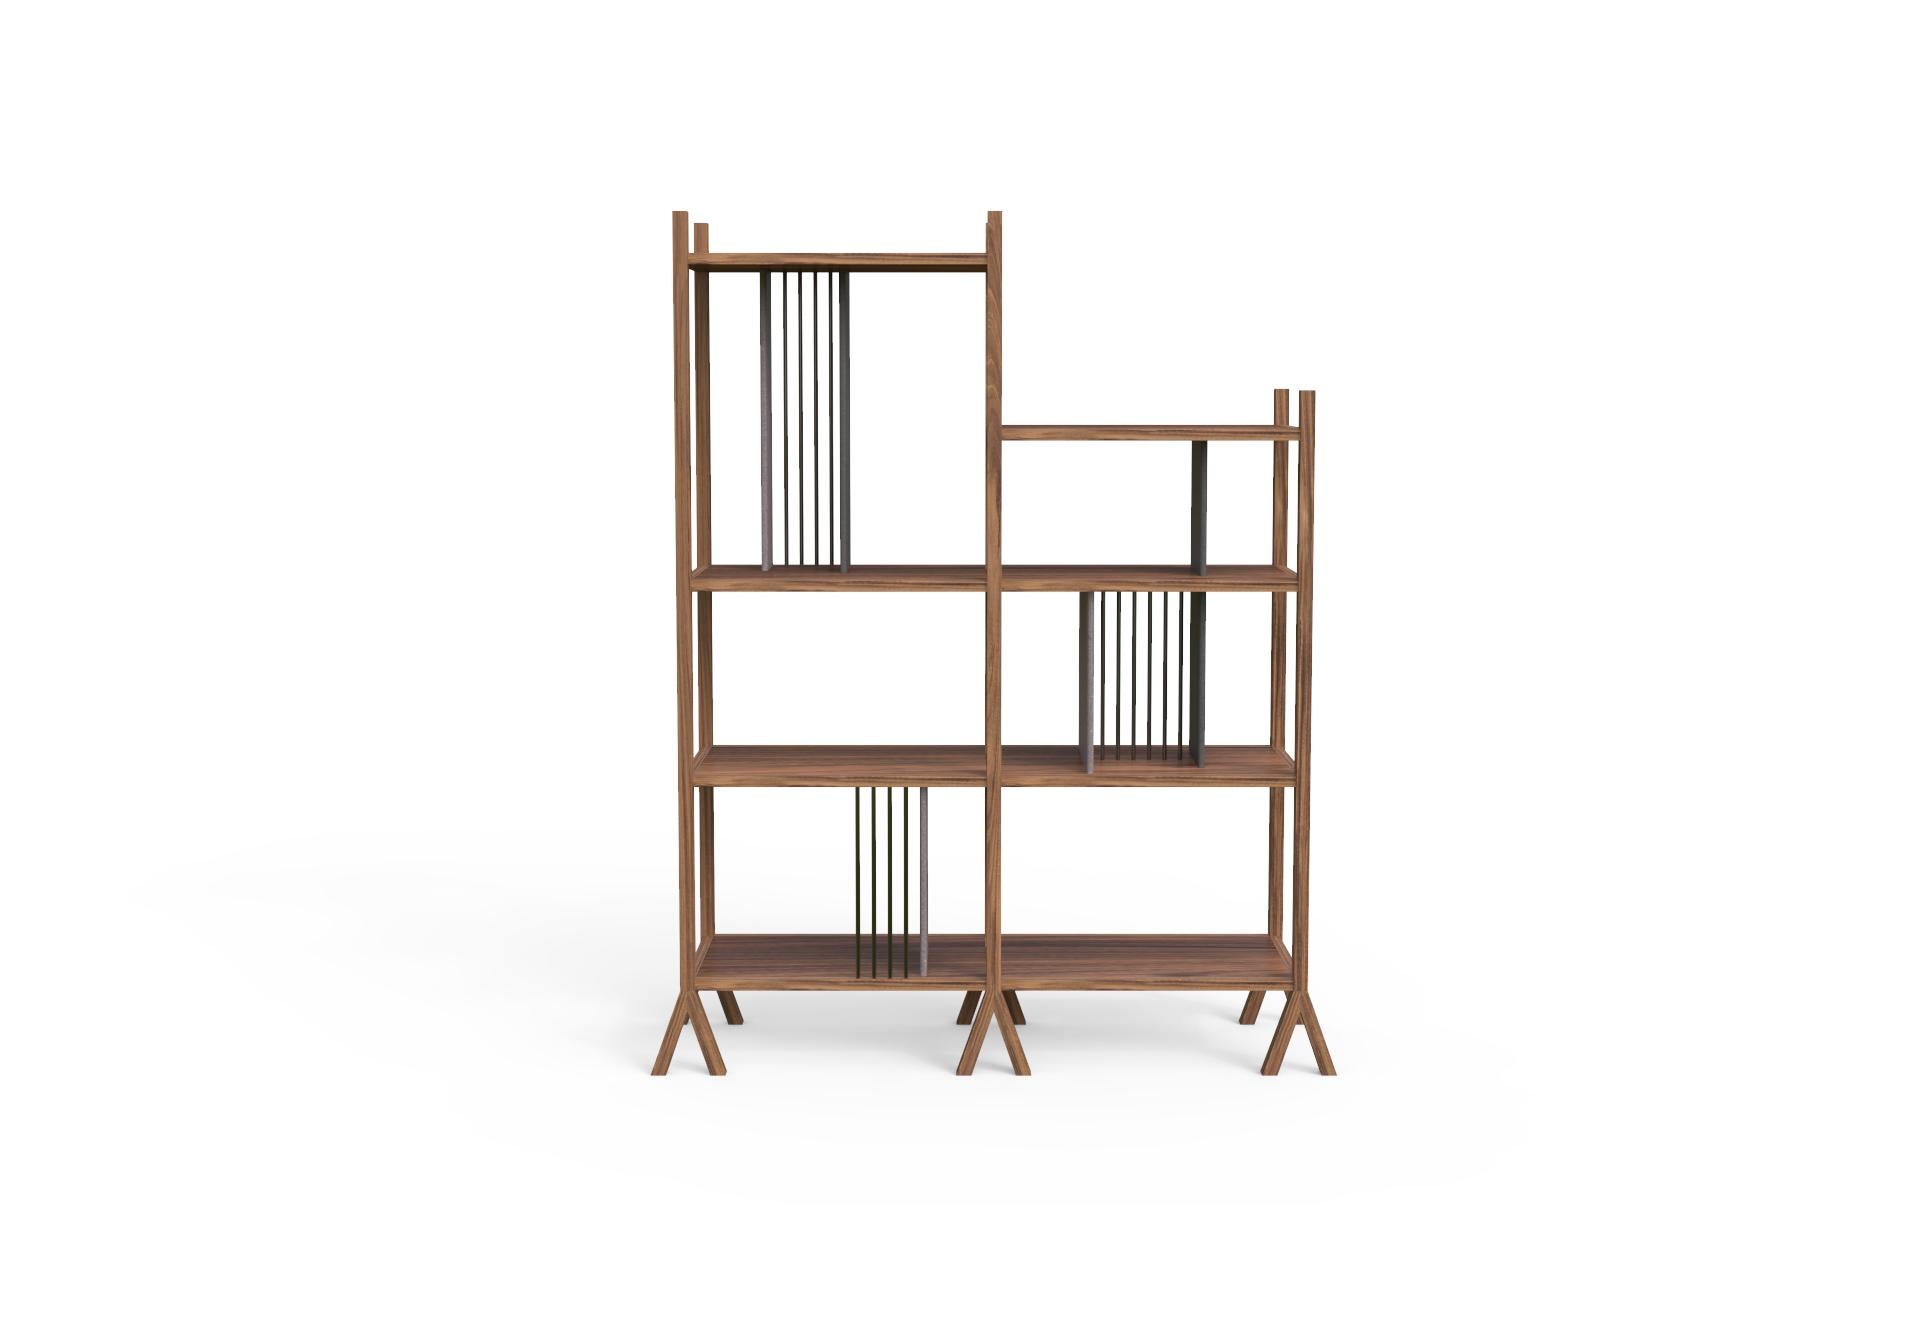 This two sided bookshelf stands out for its sleek design. This bookshelf was conceived as a compound of modular pieces that can be assembled in different variations depending on the client’s needs. The module C has two heights and more movement.